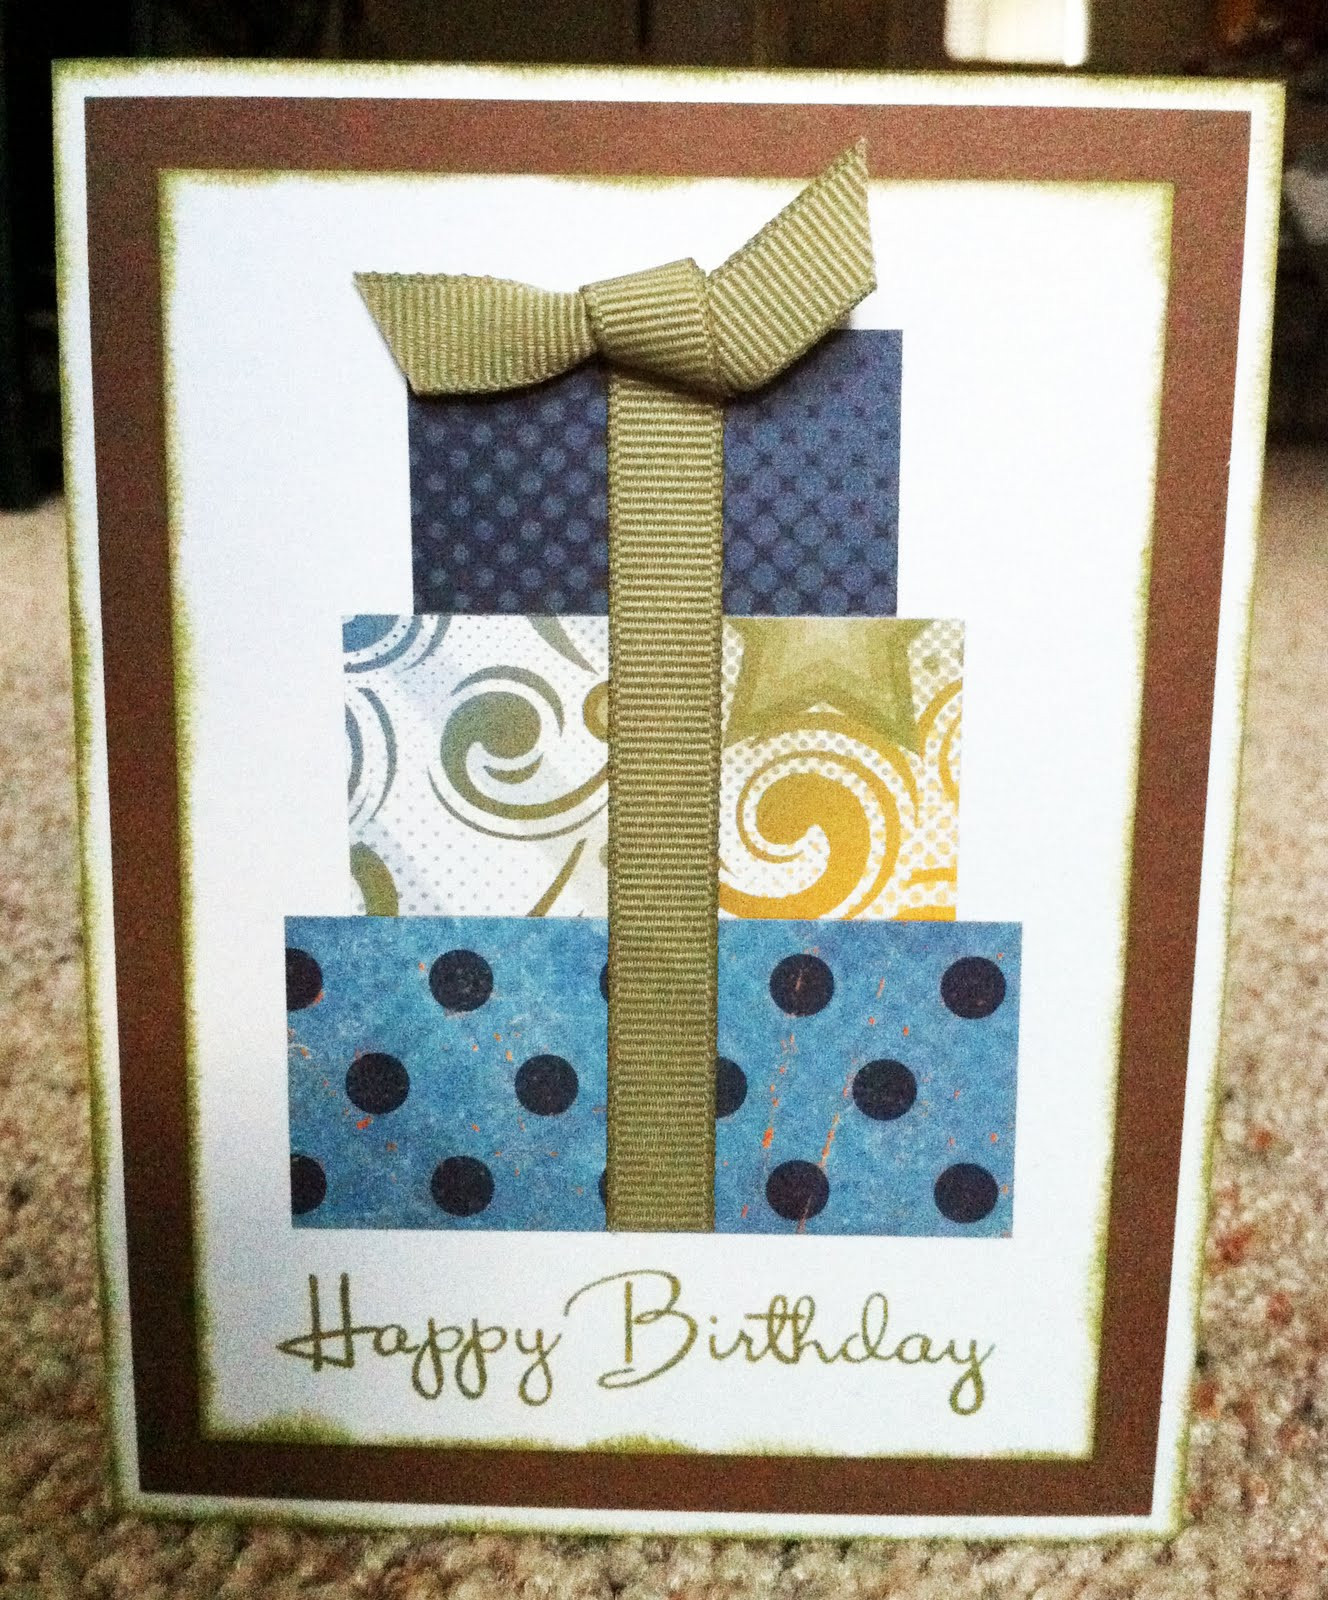 Masculine Birthday Cards
 Cards Manly on Pinterest